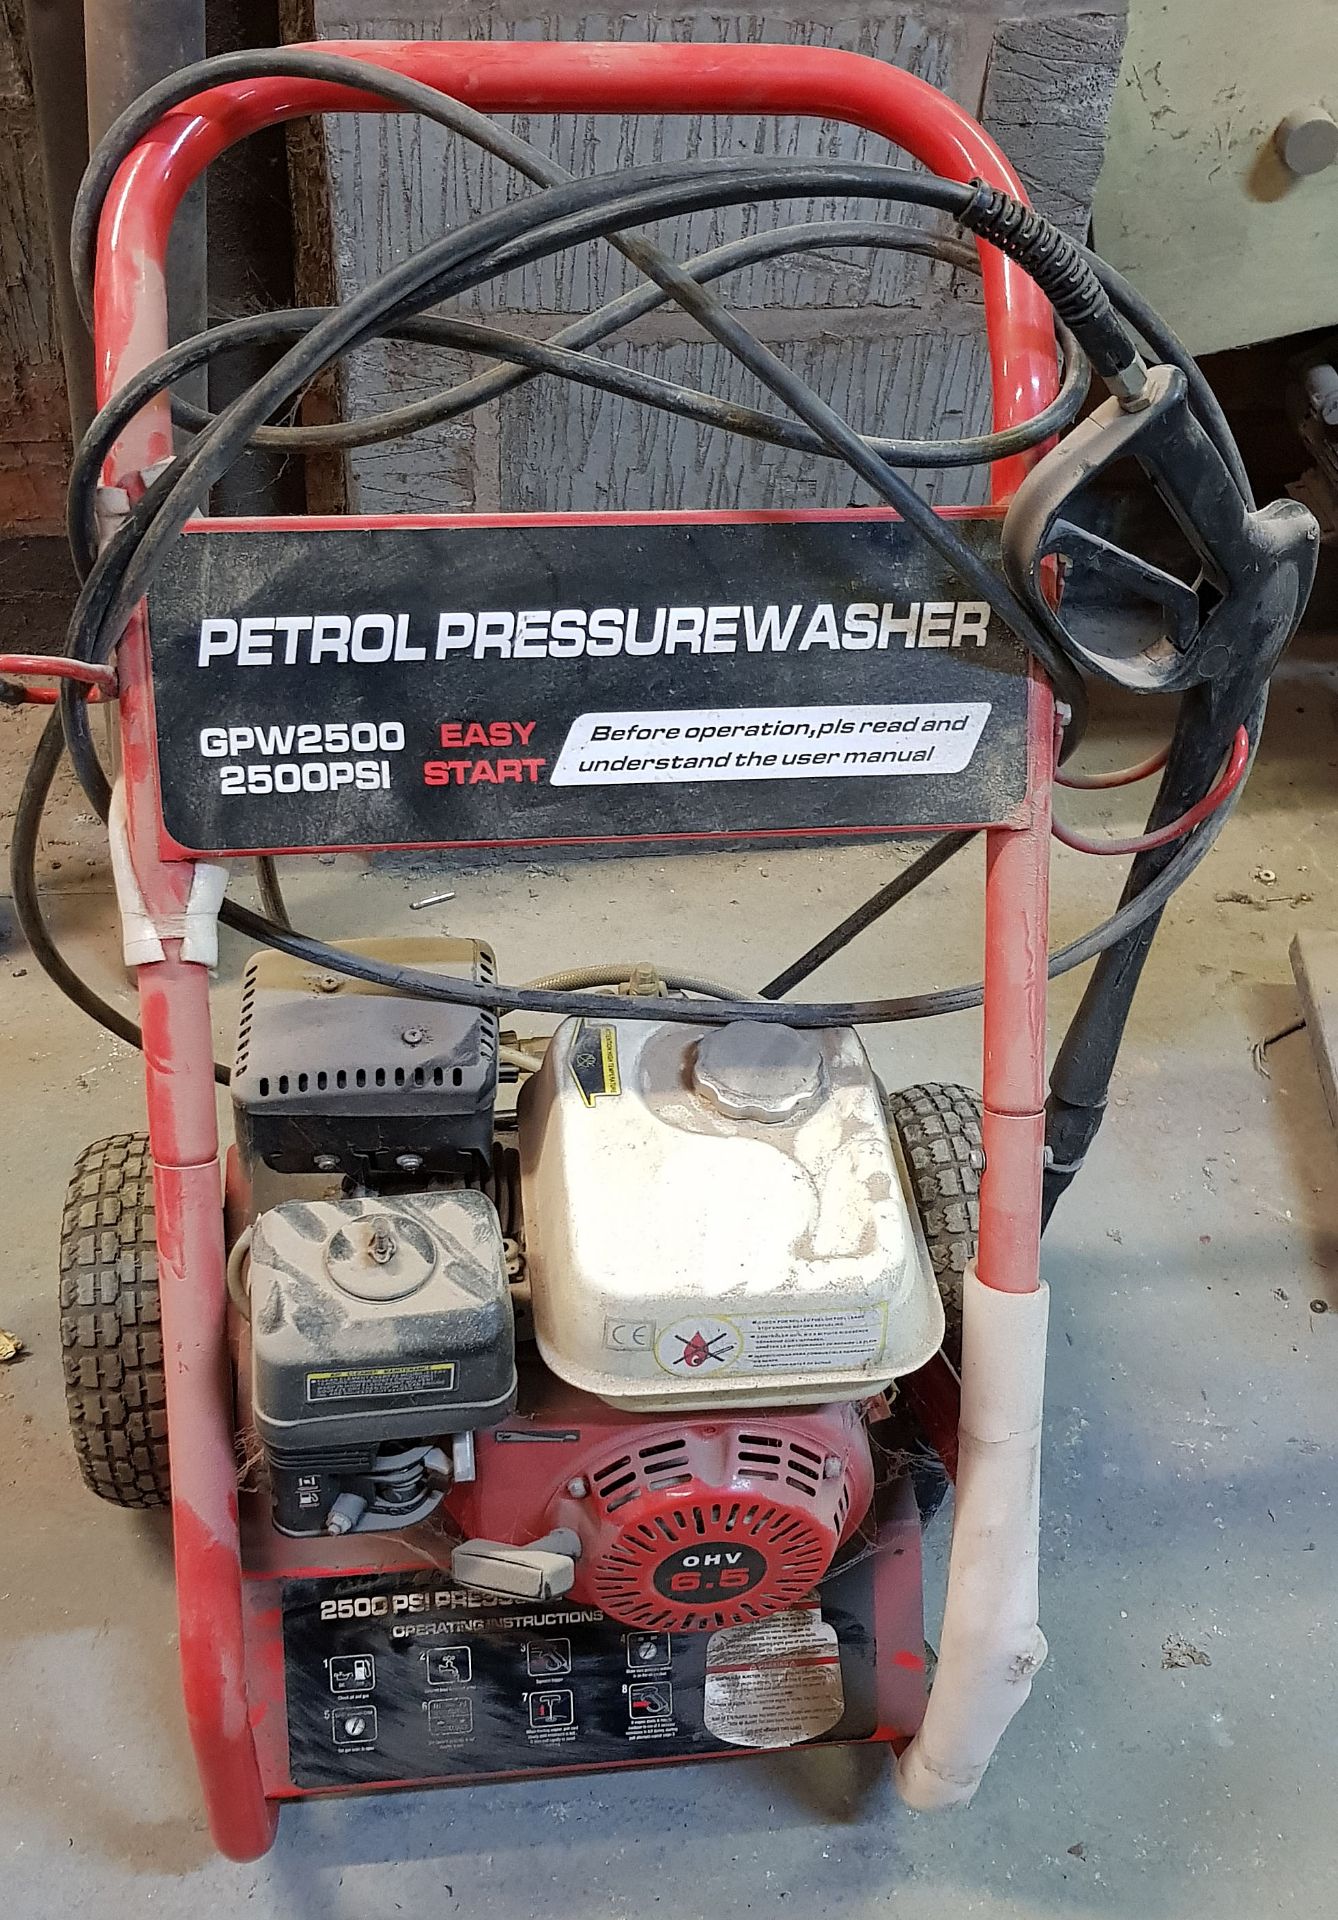 A GPW2500 2500psi Petrol Mobile Pressure Washer with Hose and Lance